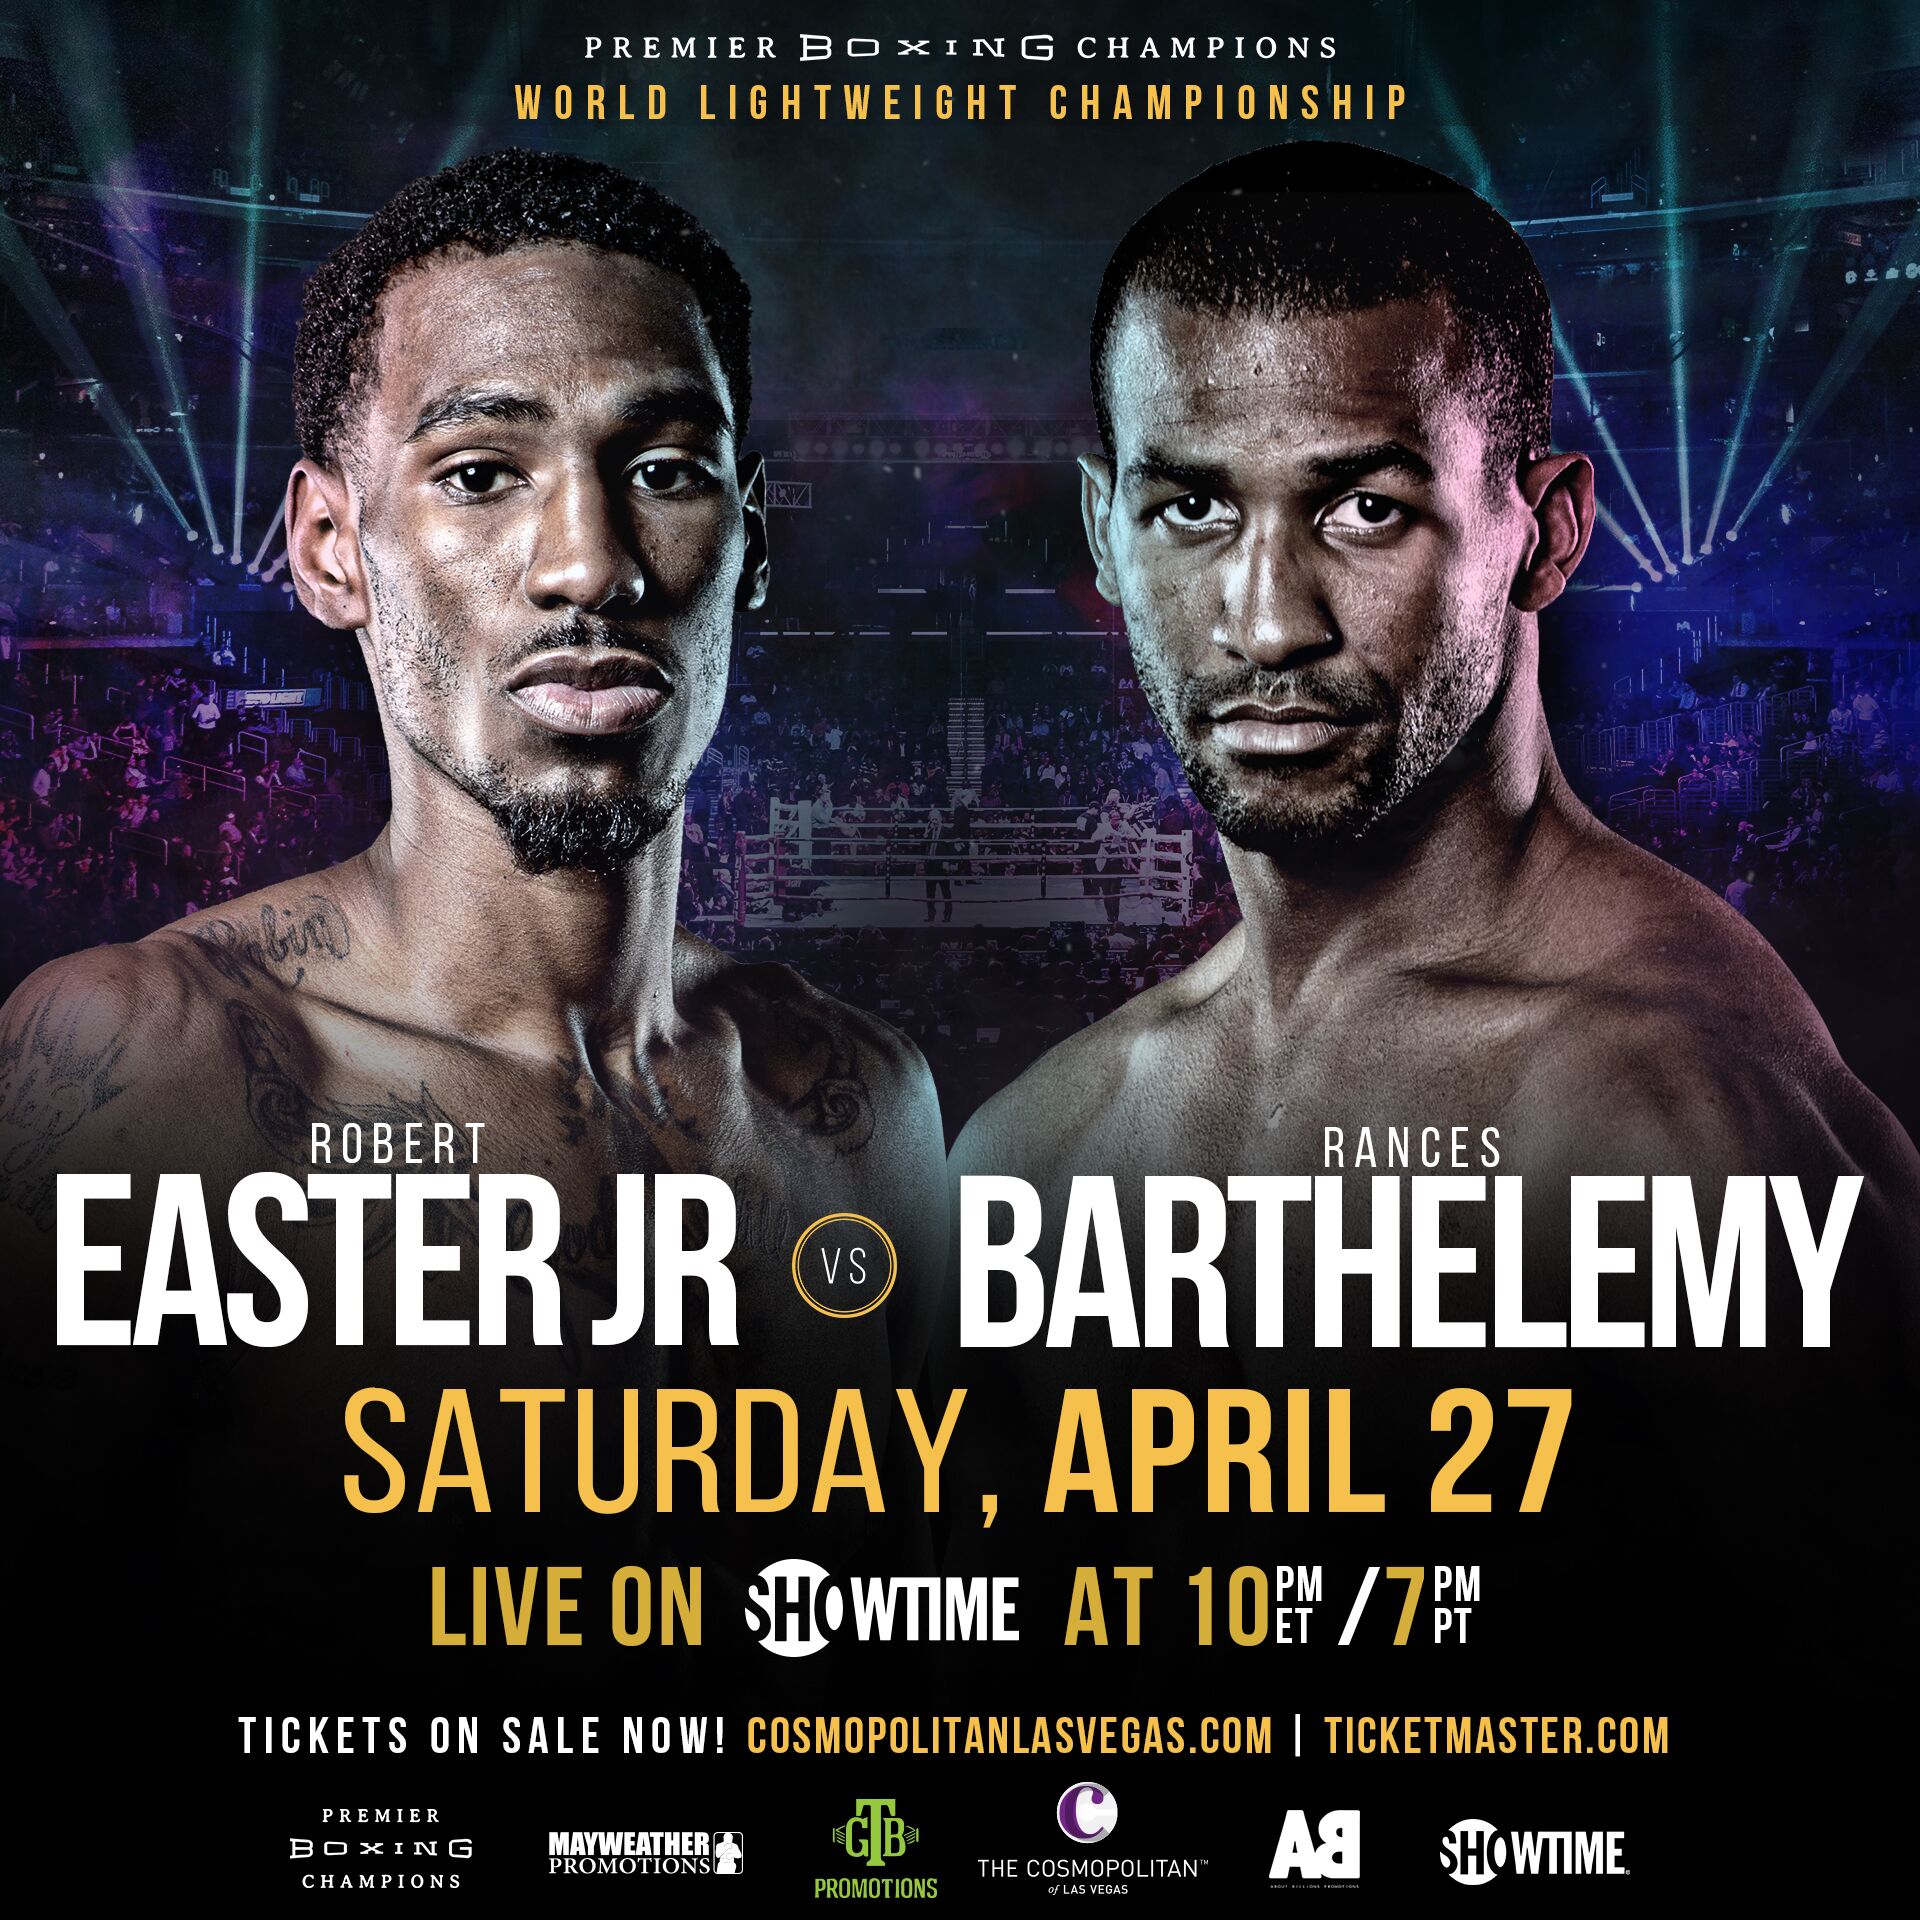 ROBERT EASTER JR. & RANCES BARTHELEMY IN WBA LIGHTWEIGHT TITLE FIGHT APRIL 27 LIVE ON SHOWTIME®